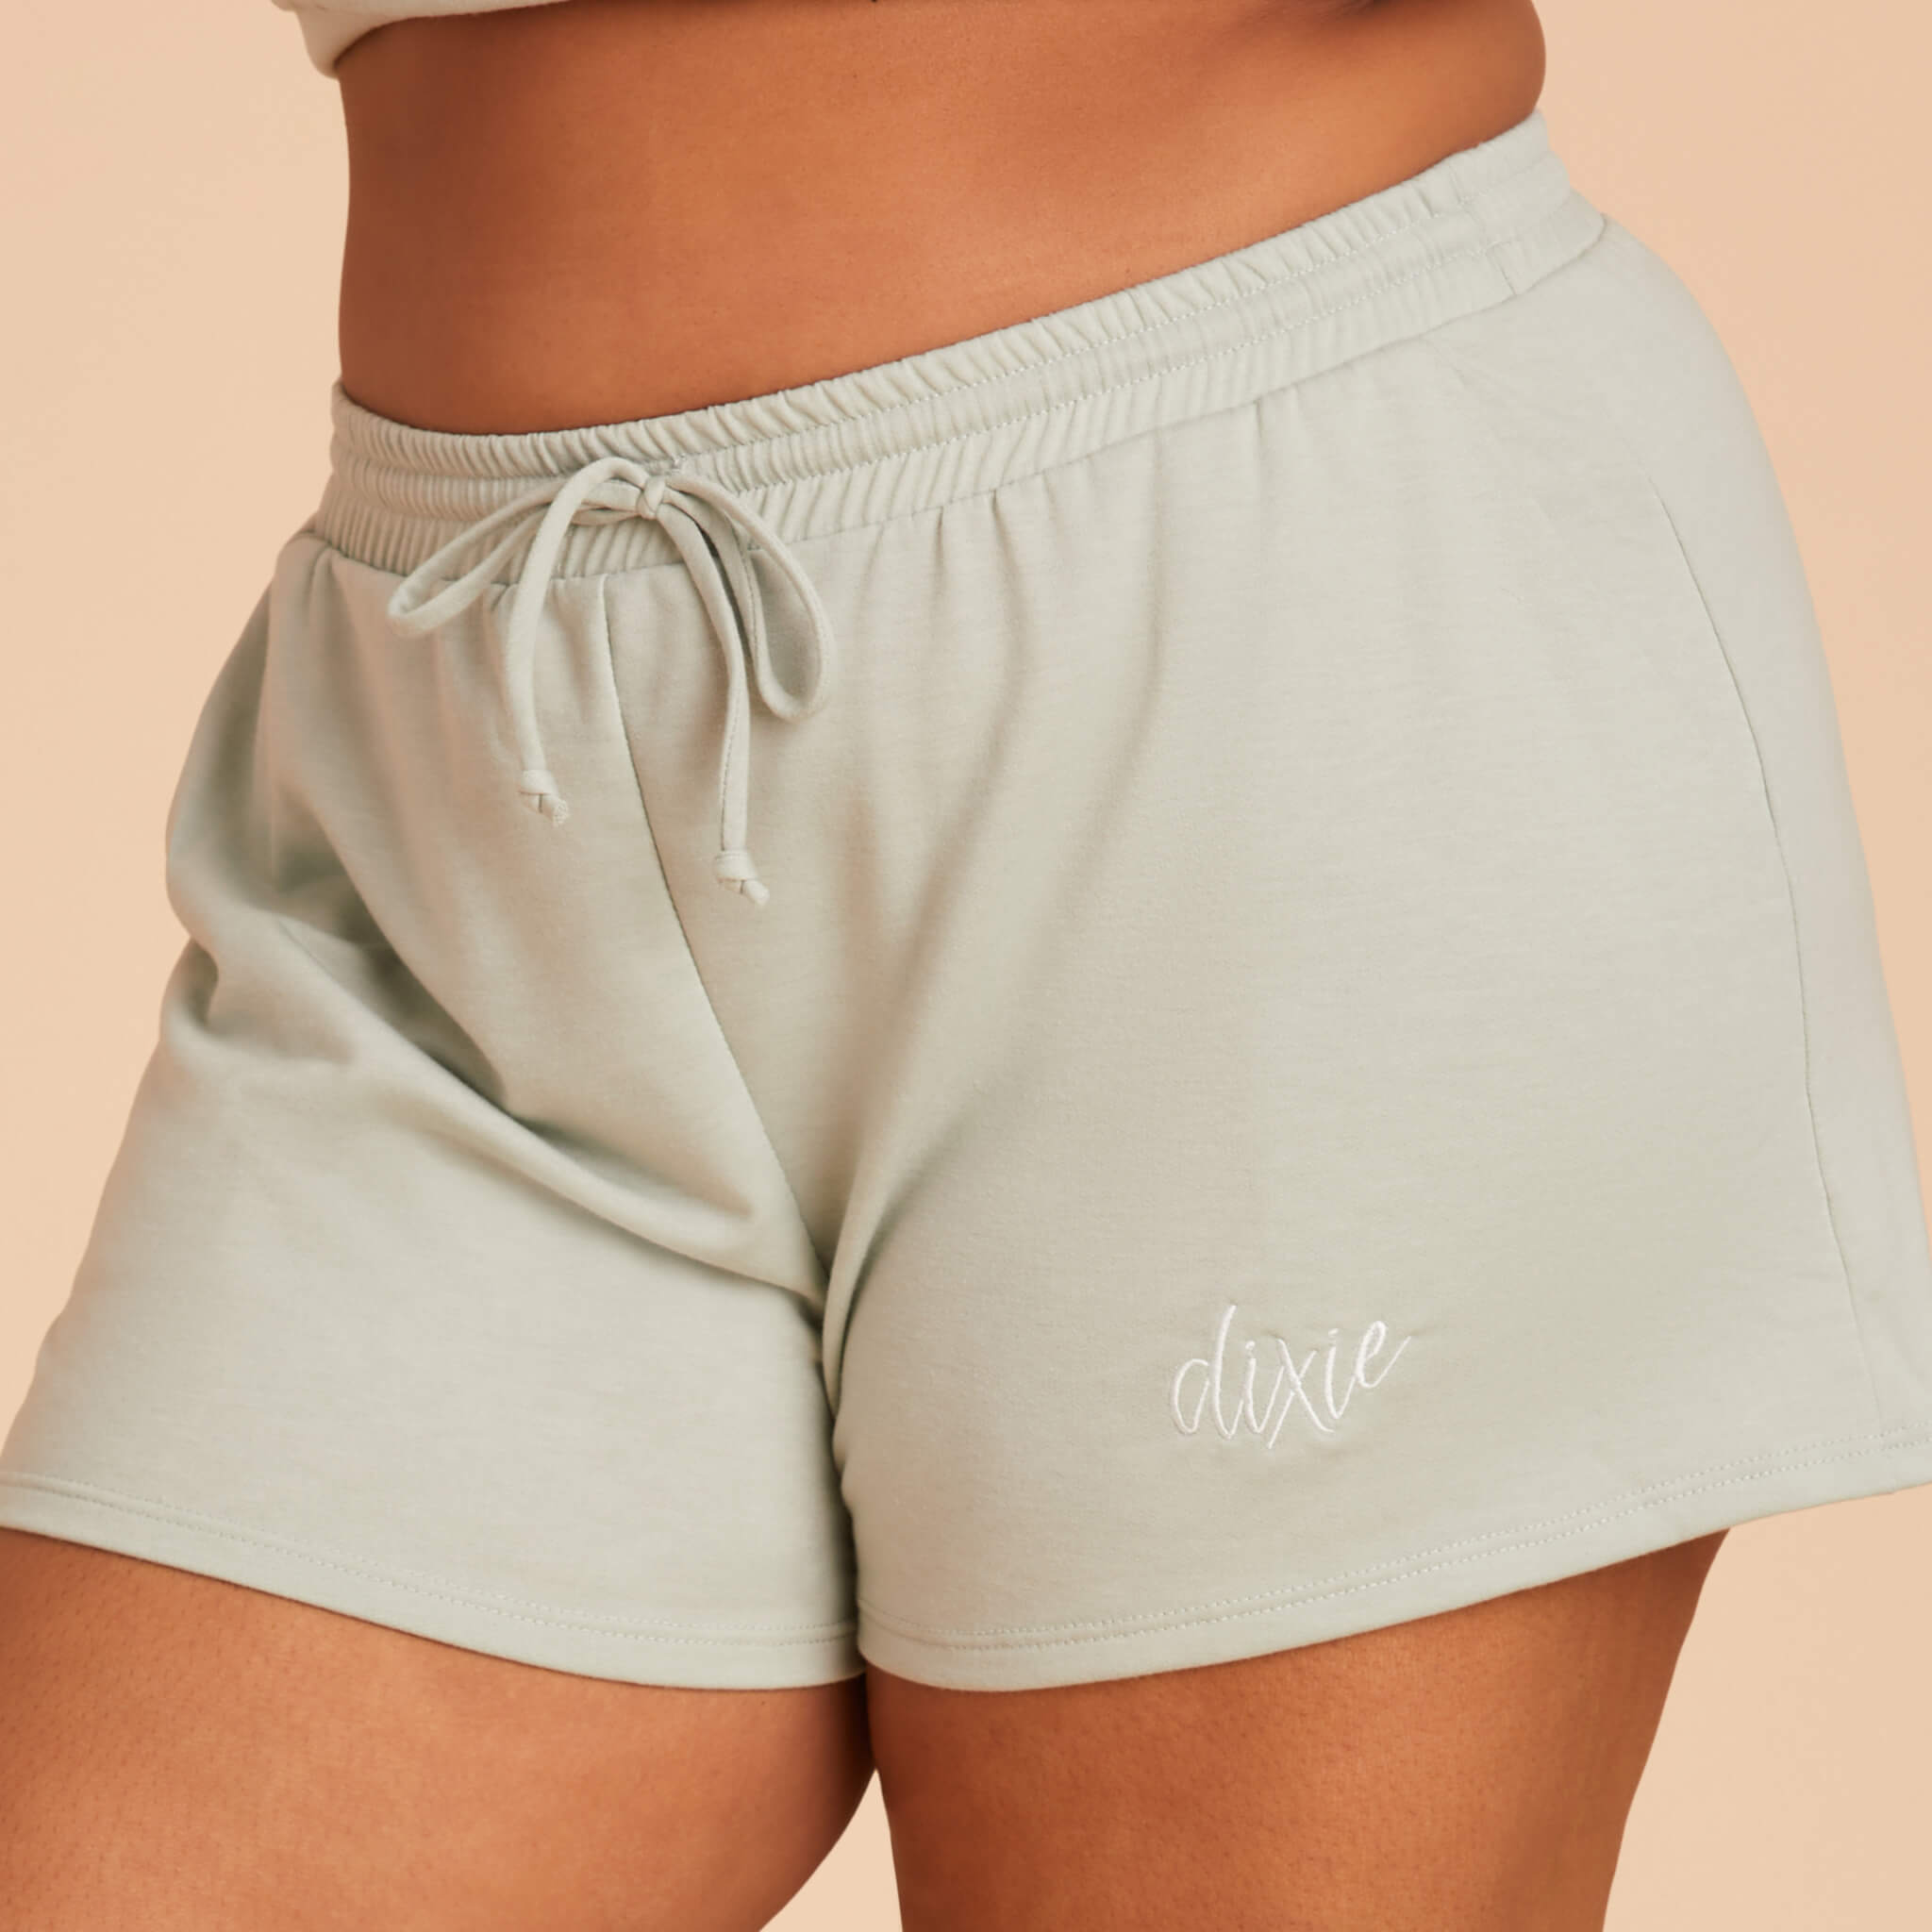 Plus Size sweat shorts loungewear in Sage Light Green with personalization